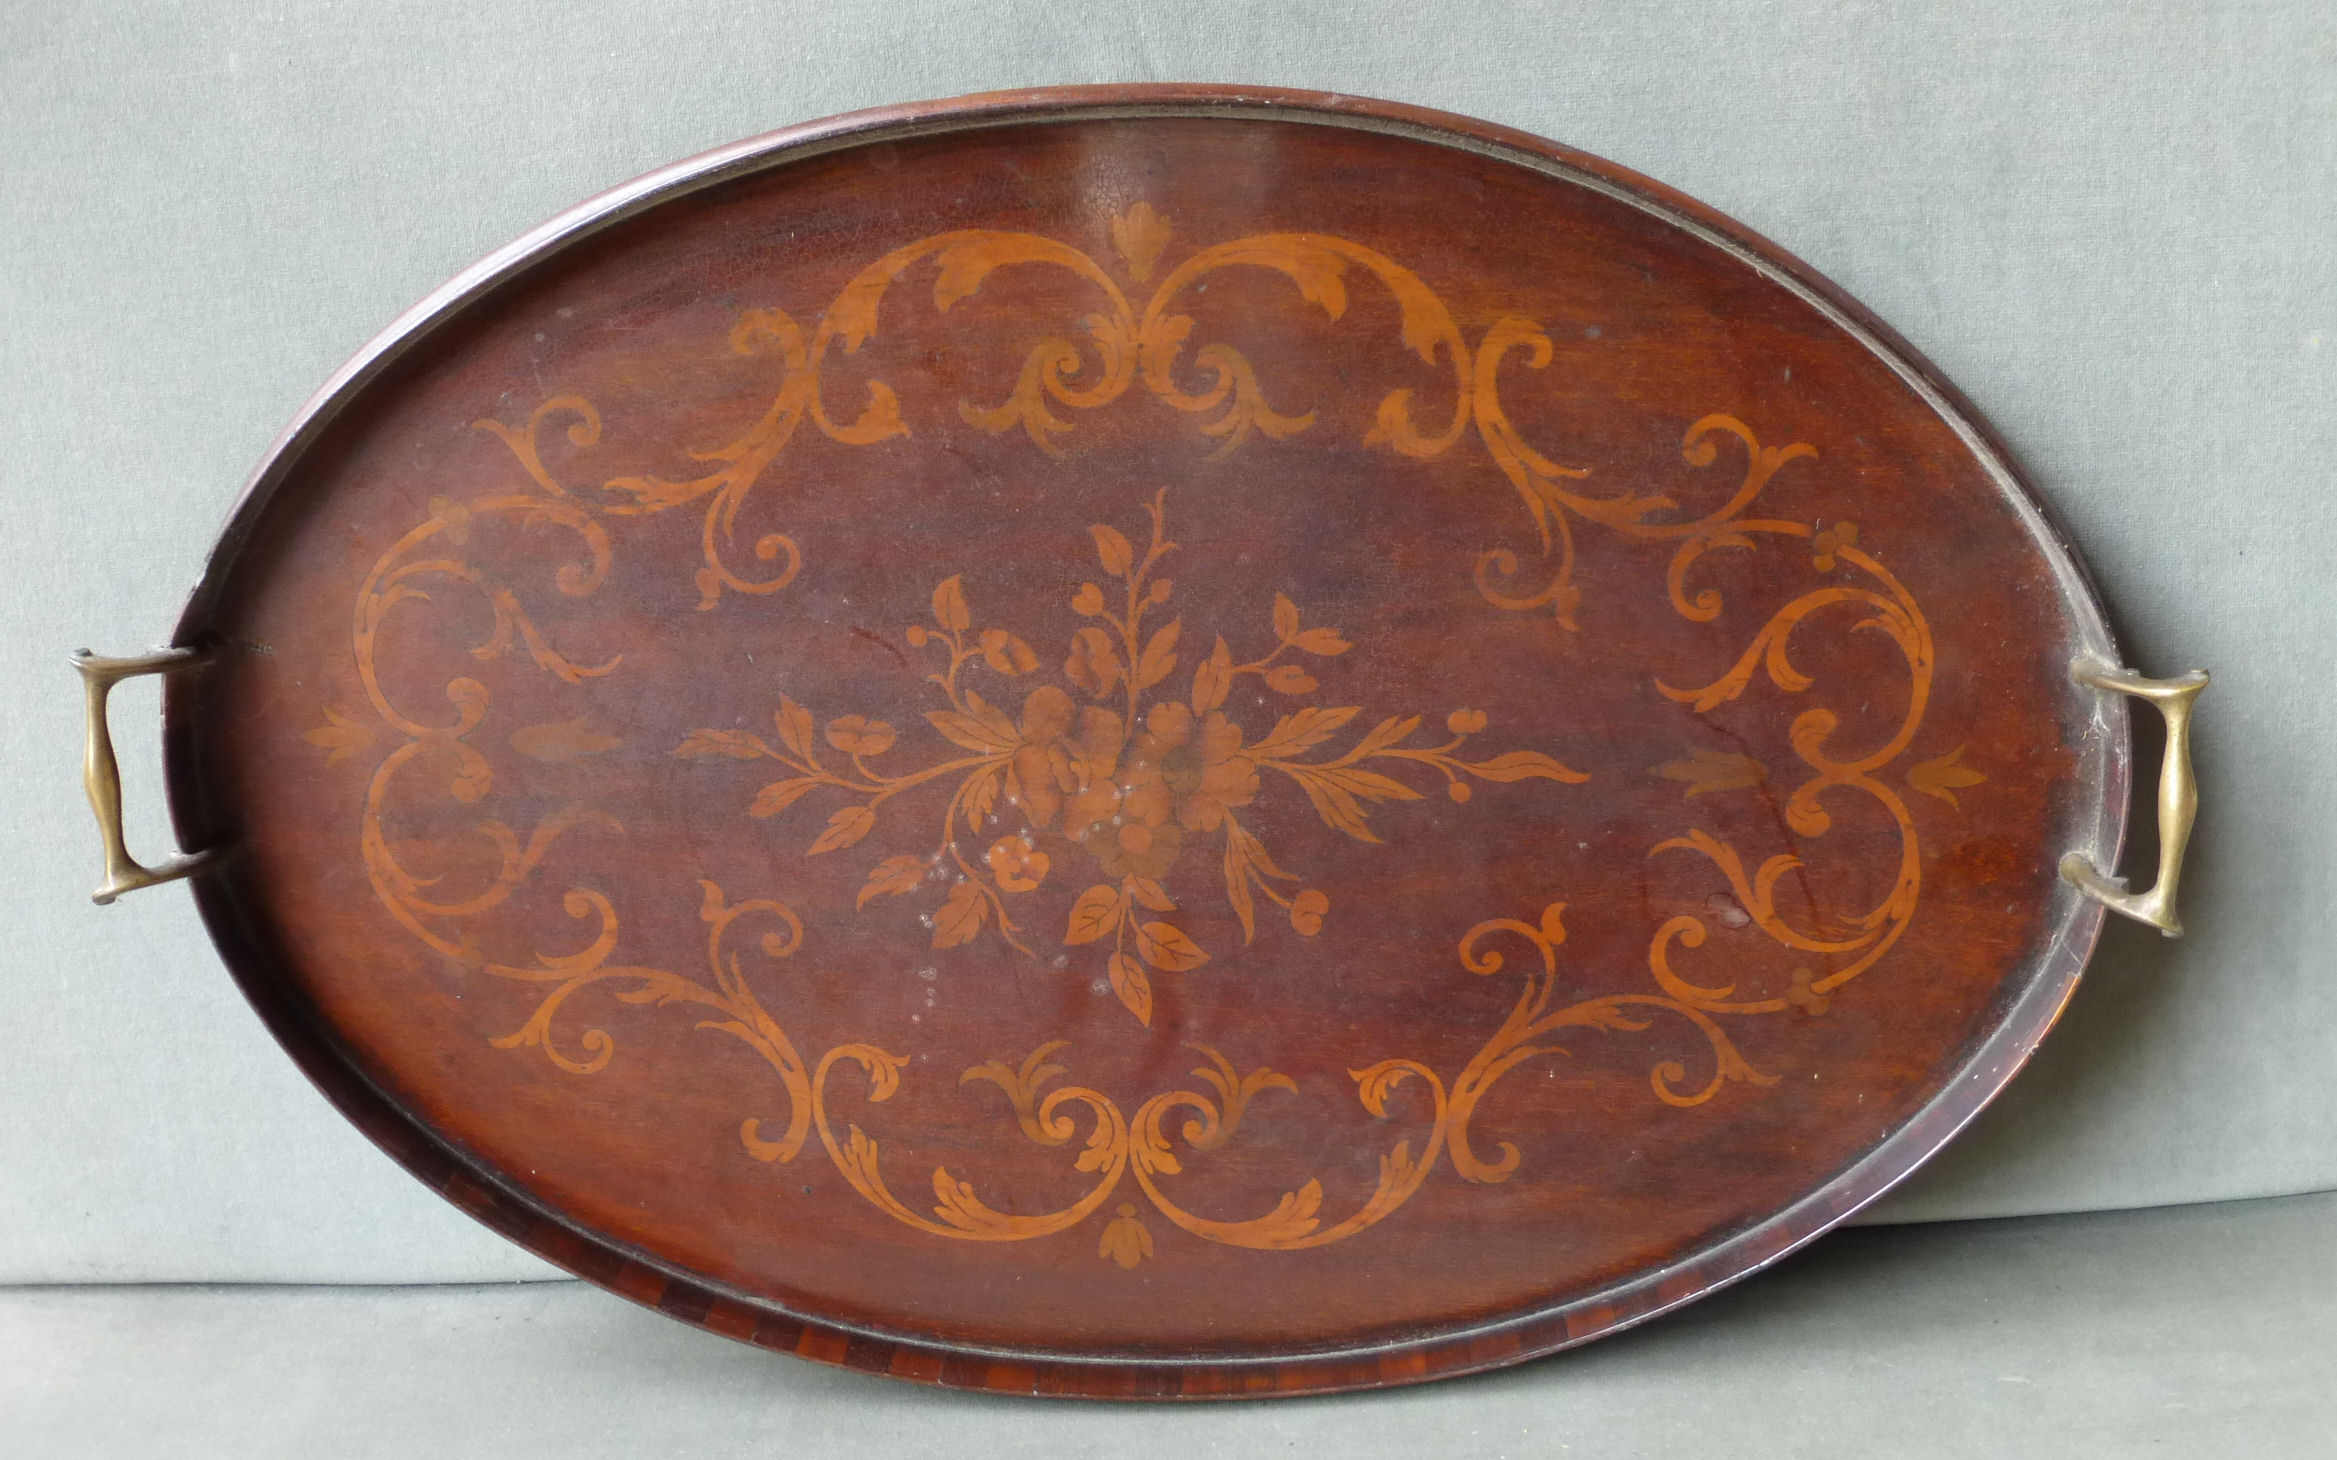 An Edwardian mahogany oval two handled Tray inlaid with floral marquetry and with brass handles, 23"